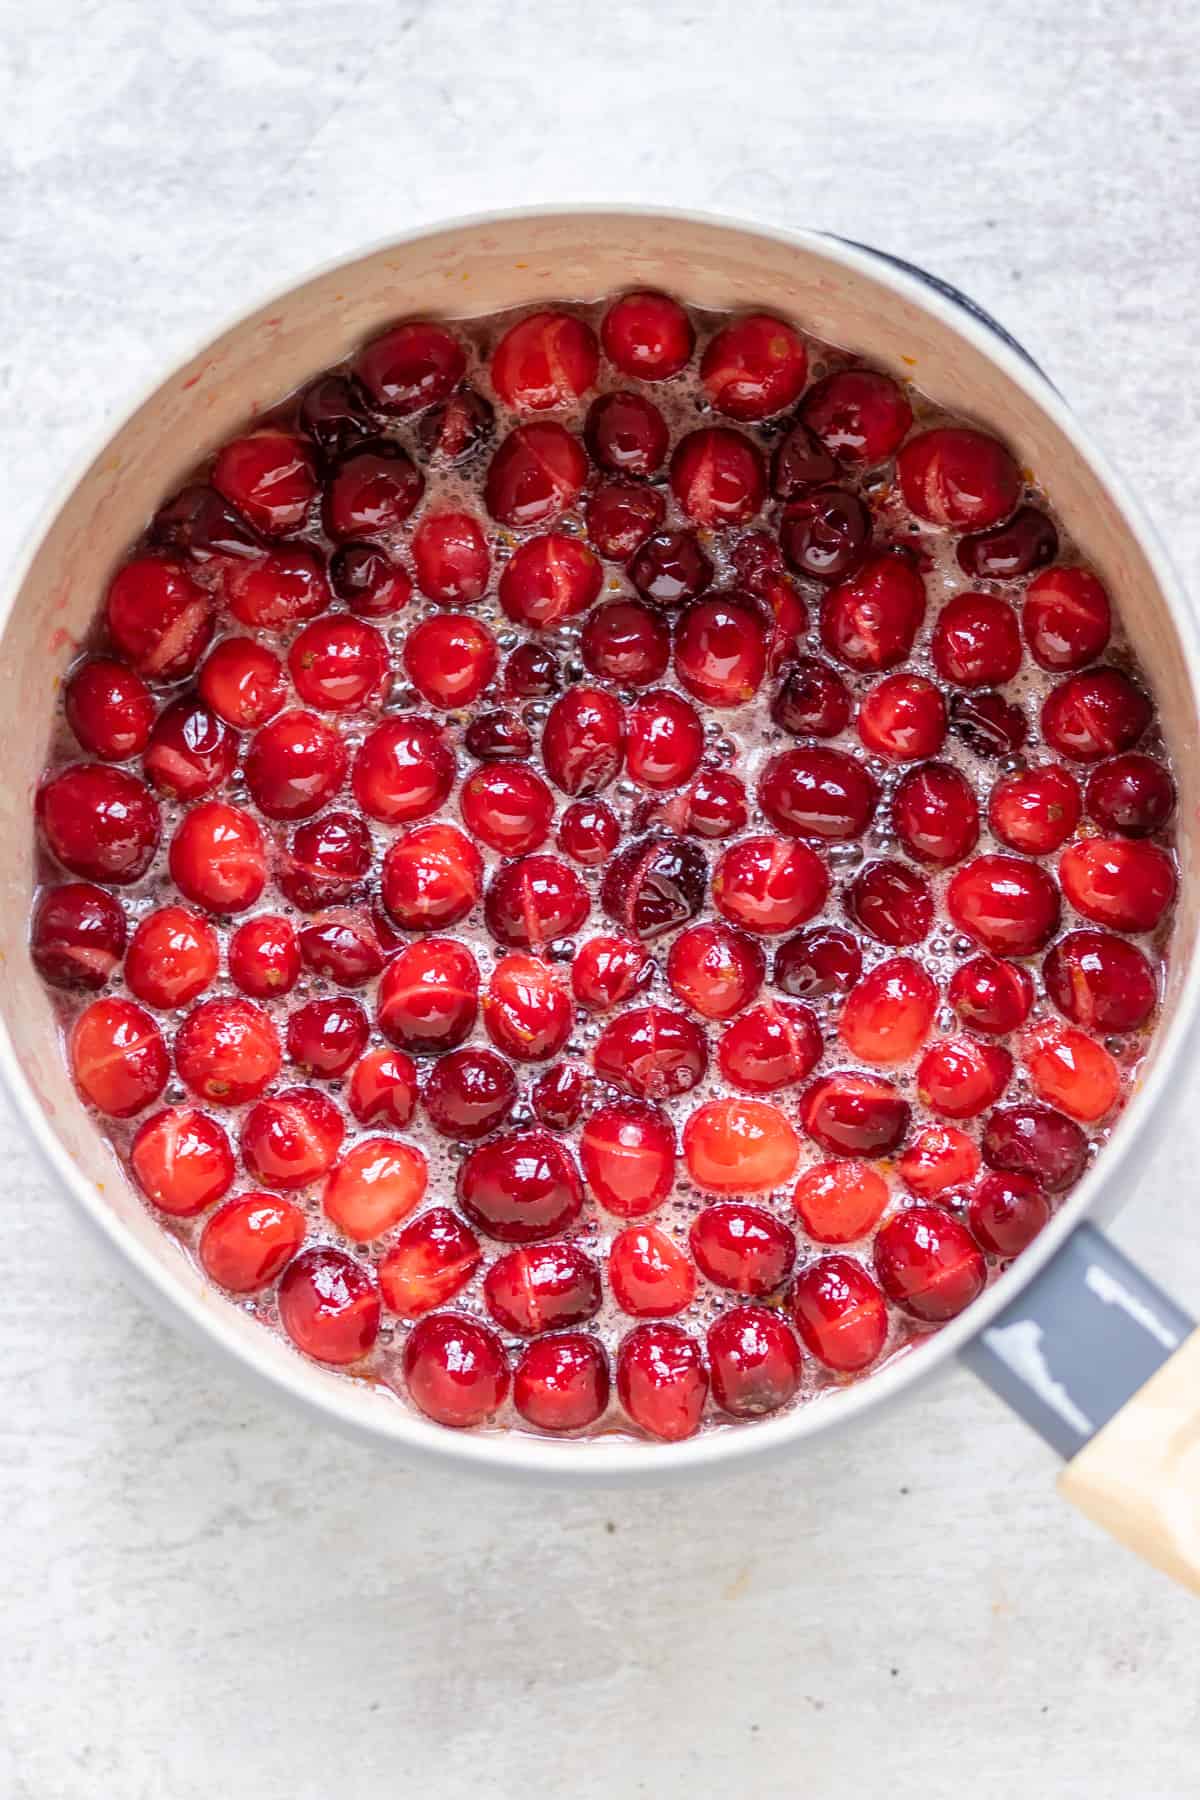 Partially cooked cranberries.